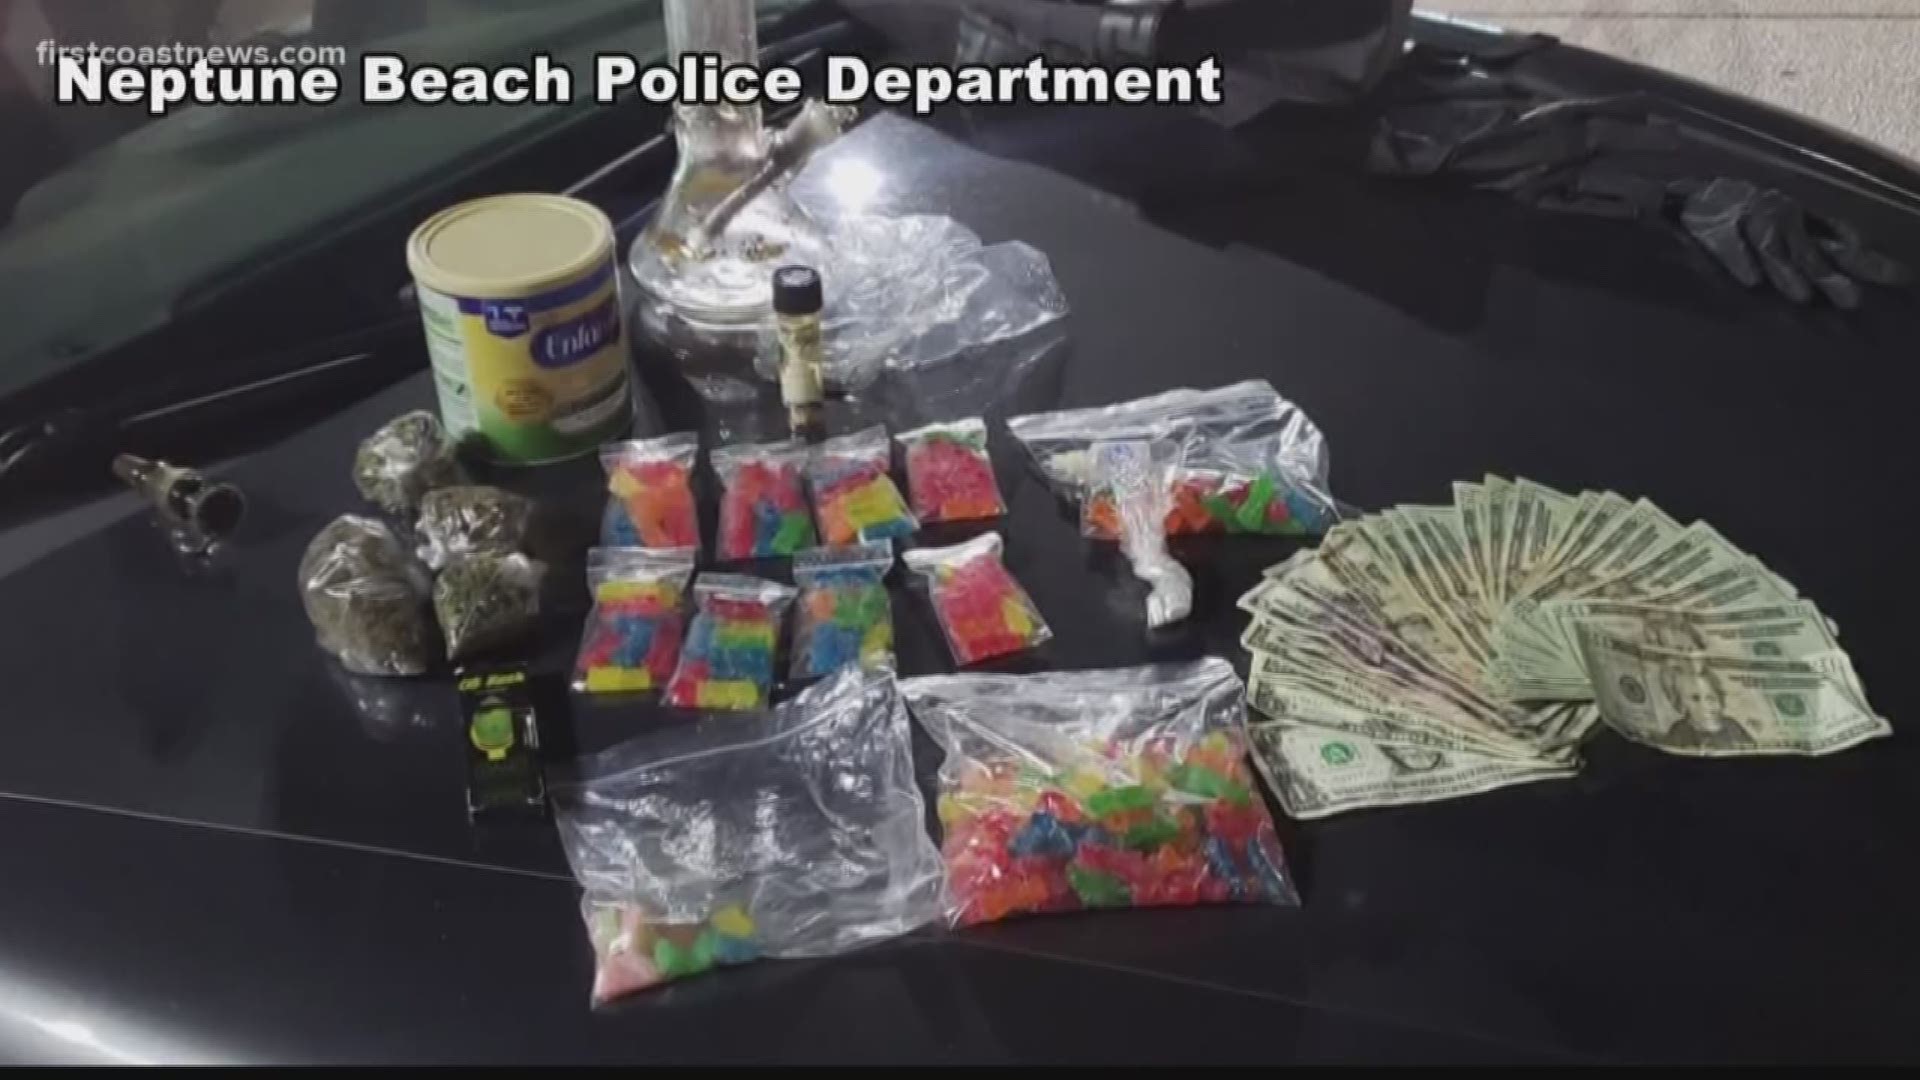 The Neptune Beach Police Department wants parents to sort through their kids' candy on Halloween.